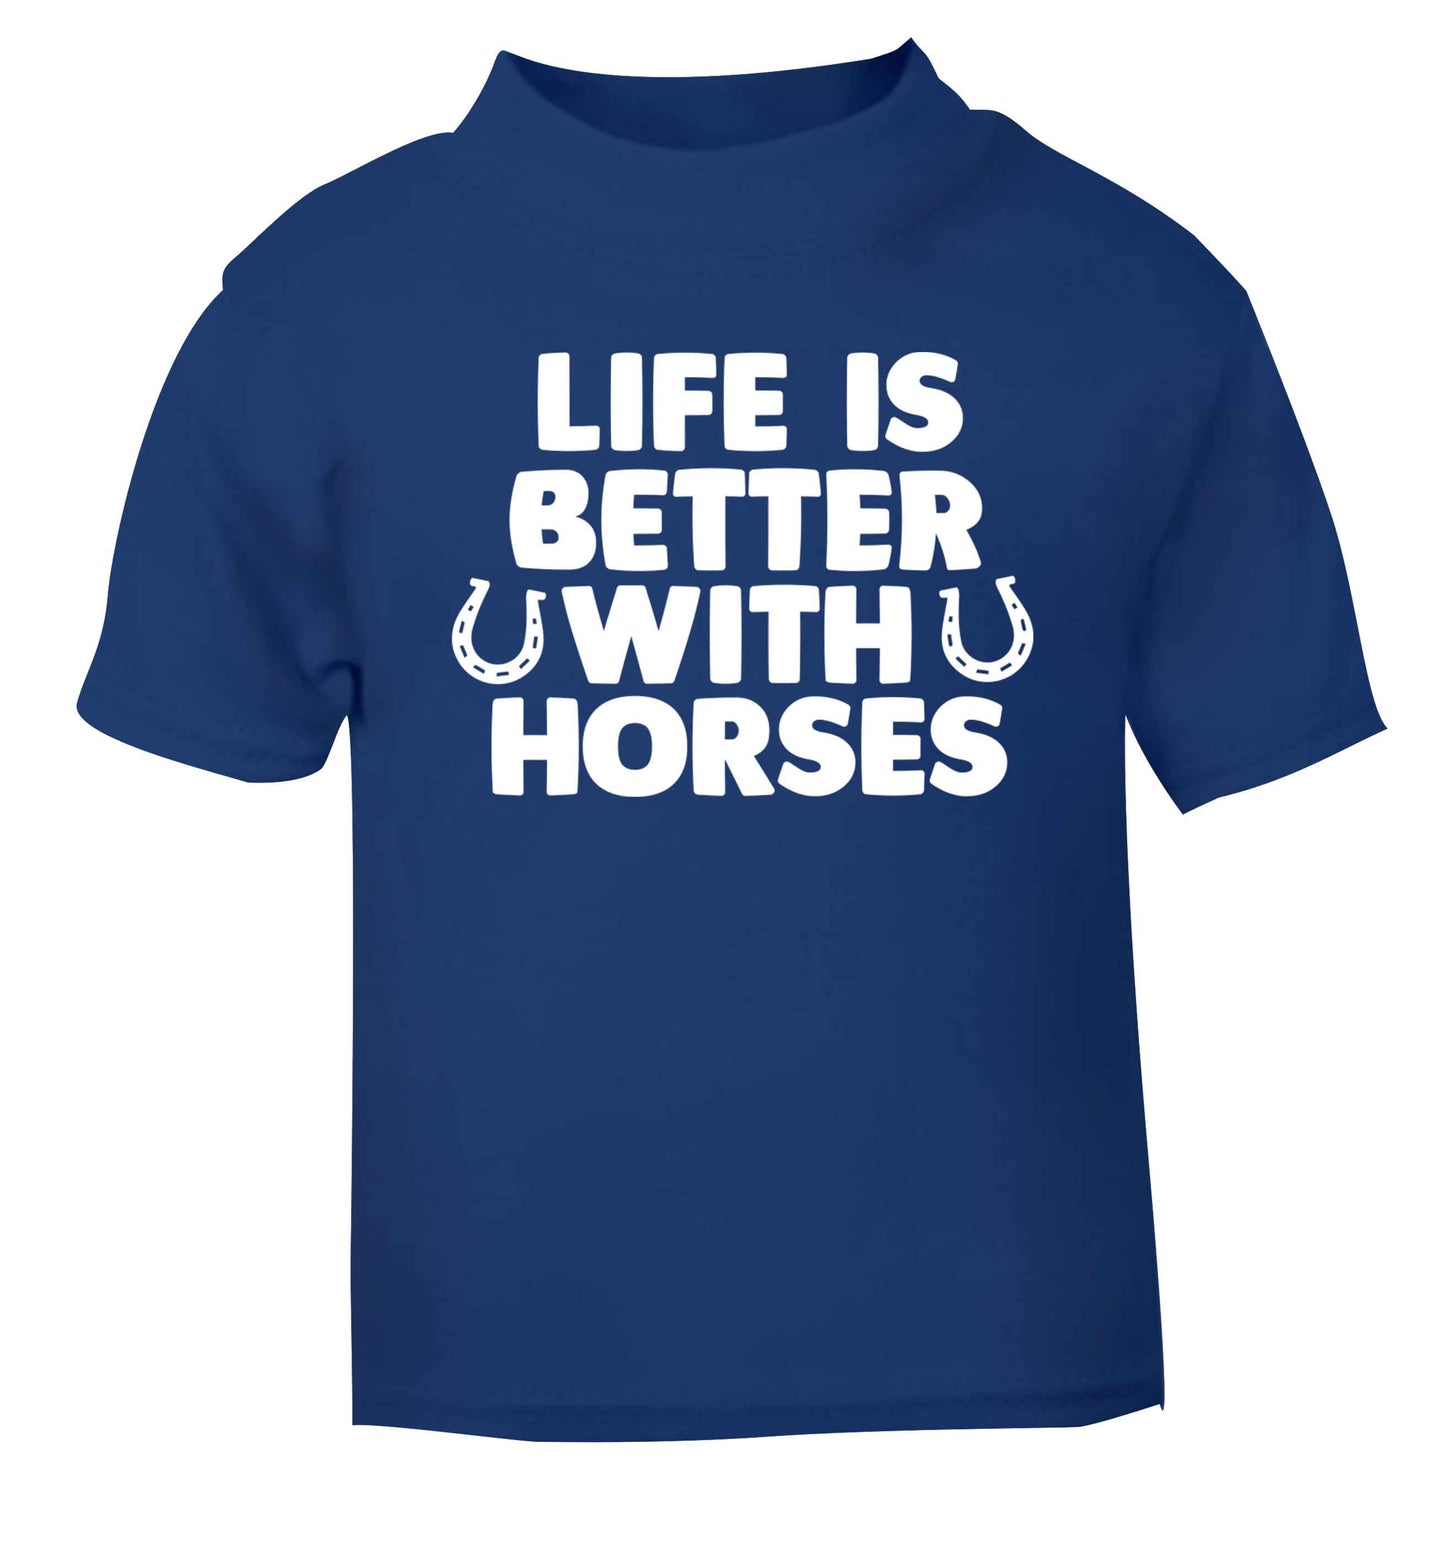 Life is better with horses blue baby toddler Tshirt 2 Years